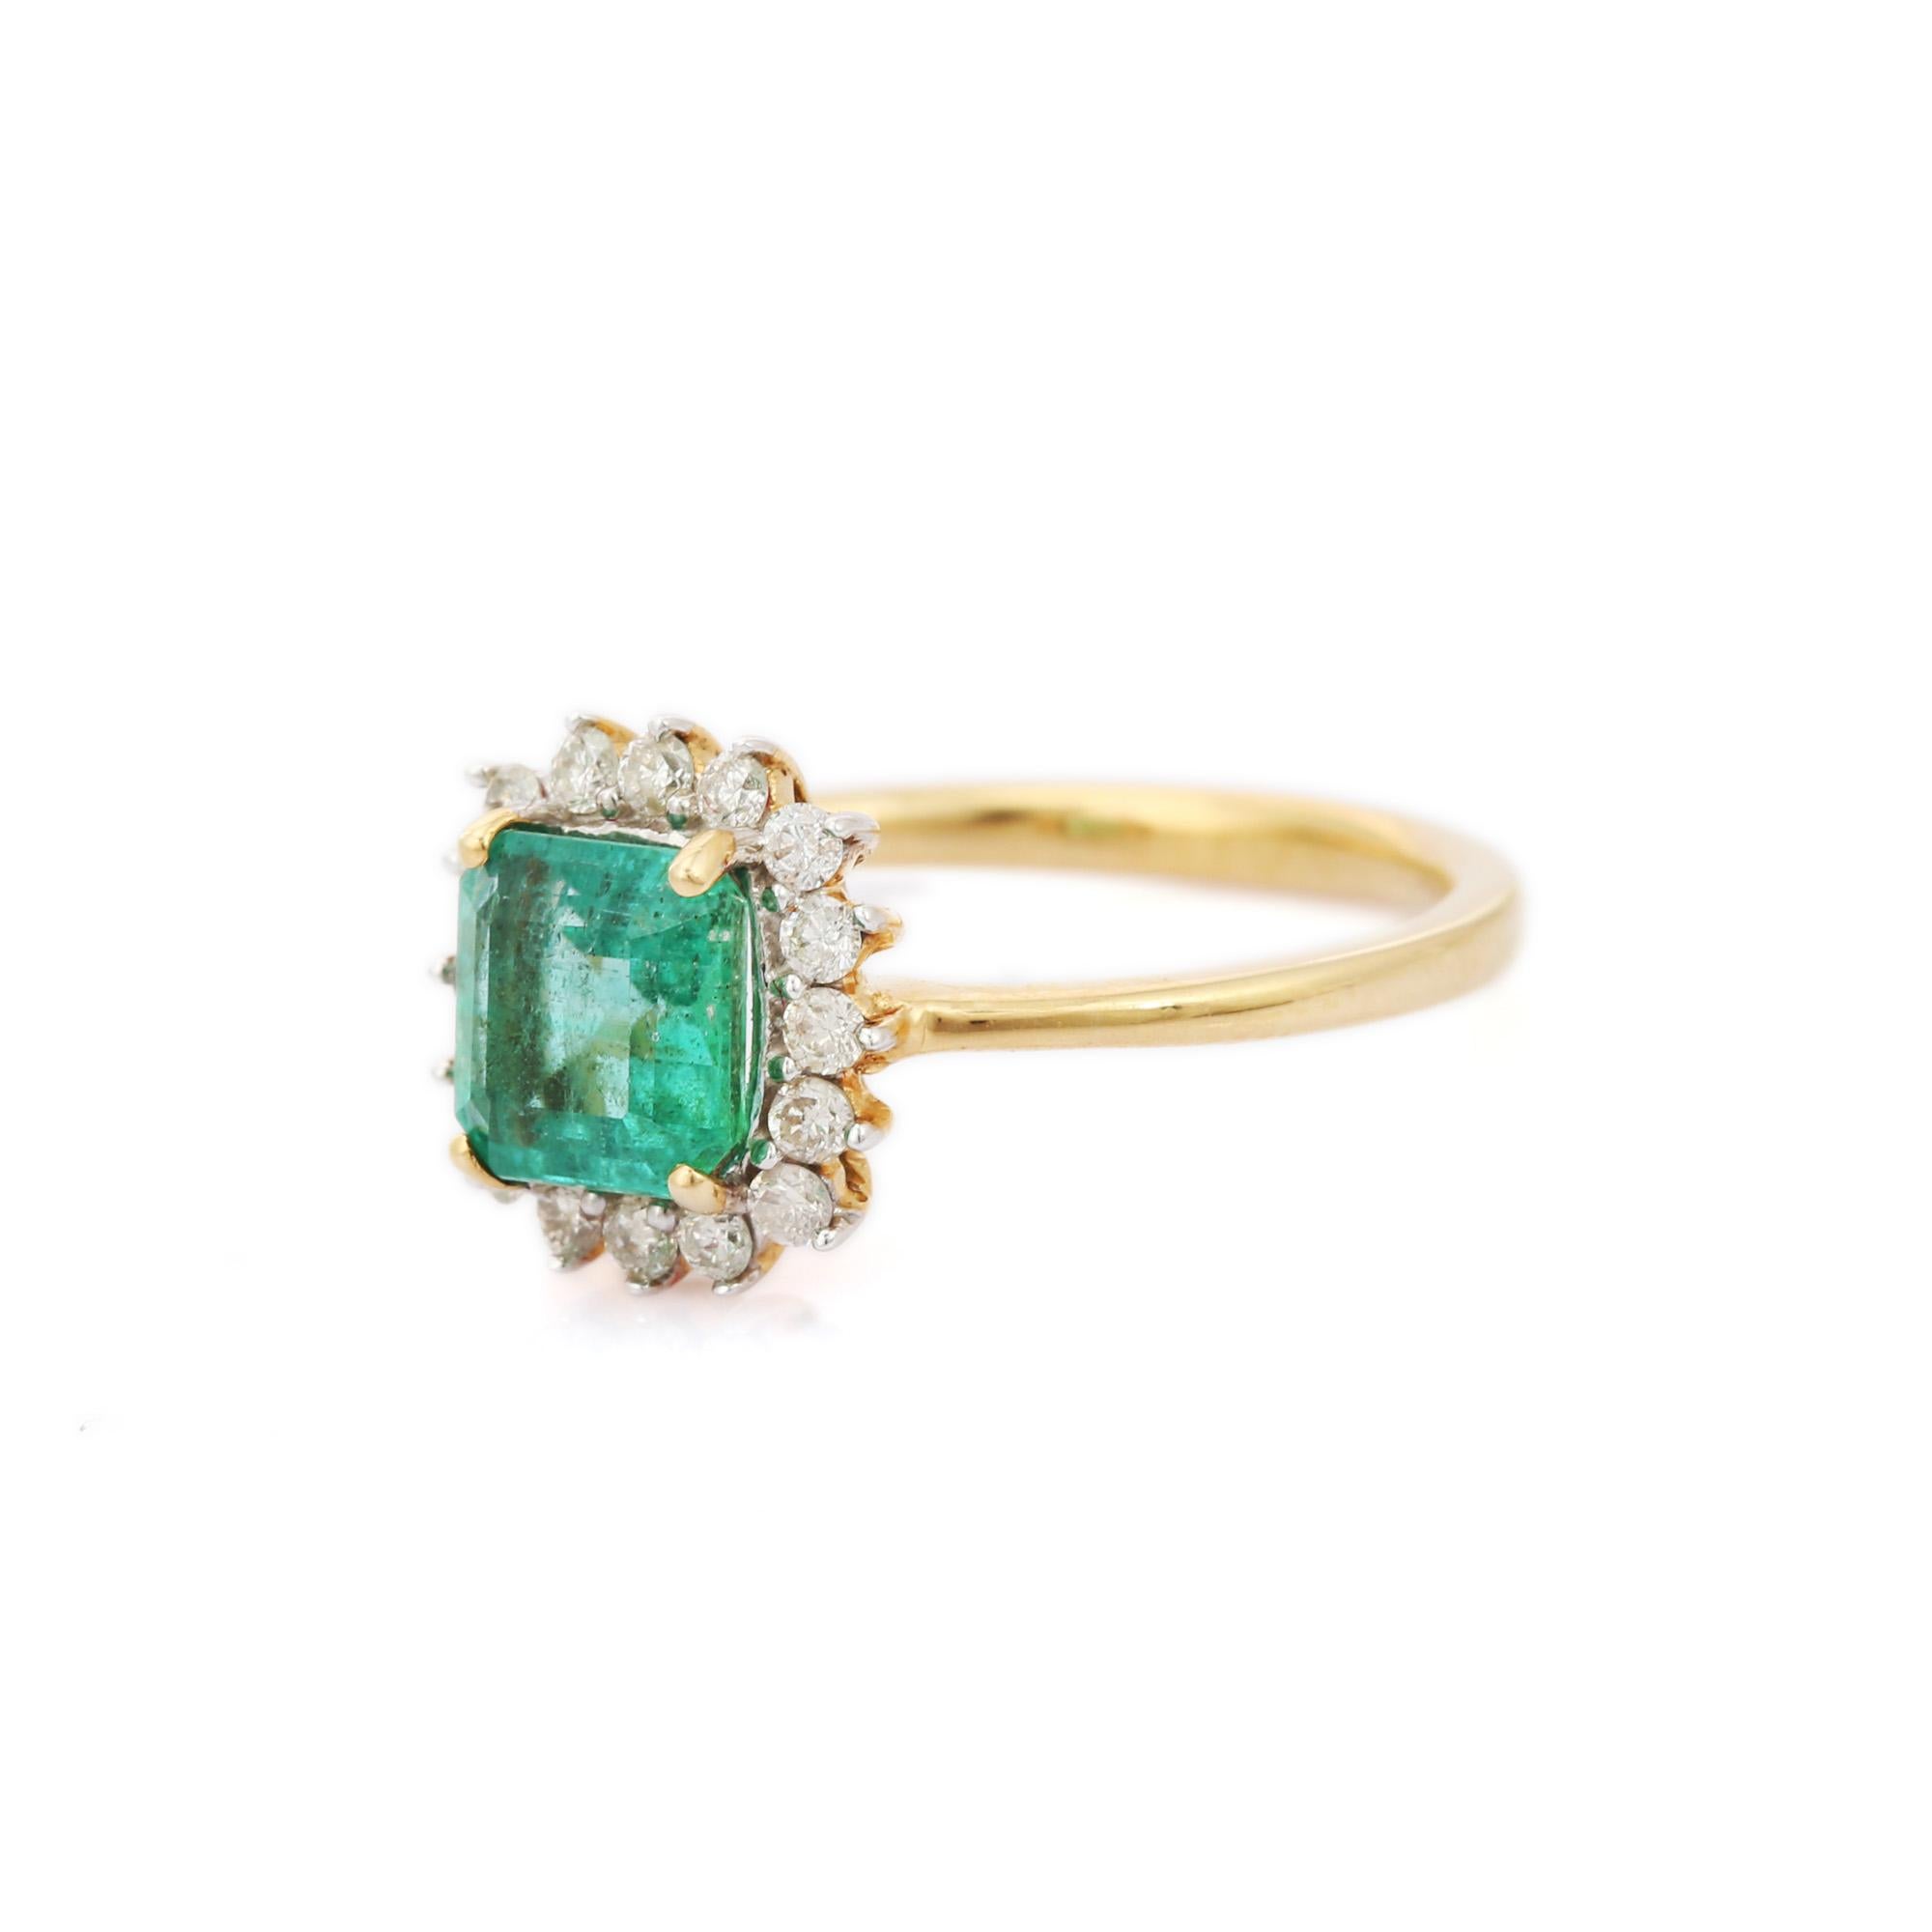 For Sale:  Designer Emerald and Diamond Bridal Ring in 18K Yellow Gold  3